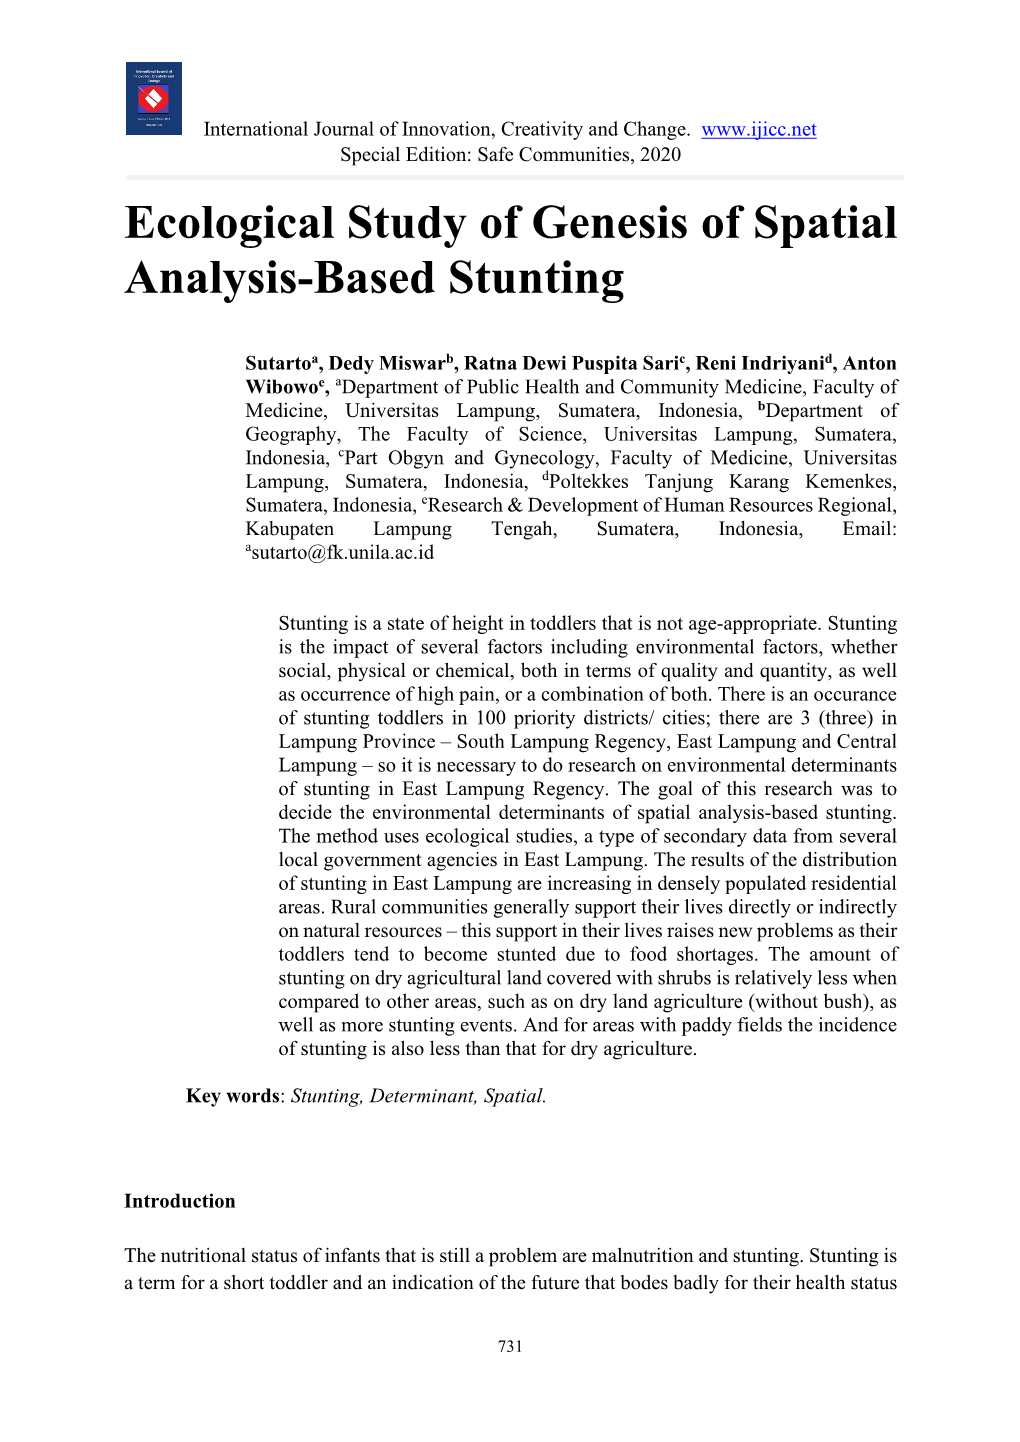 Ecological Study of Genesis of Spatial Analysis-Based Stunting